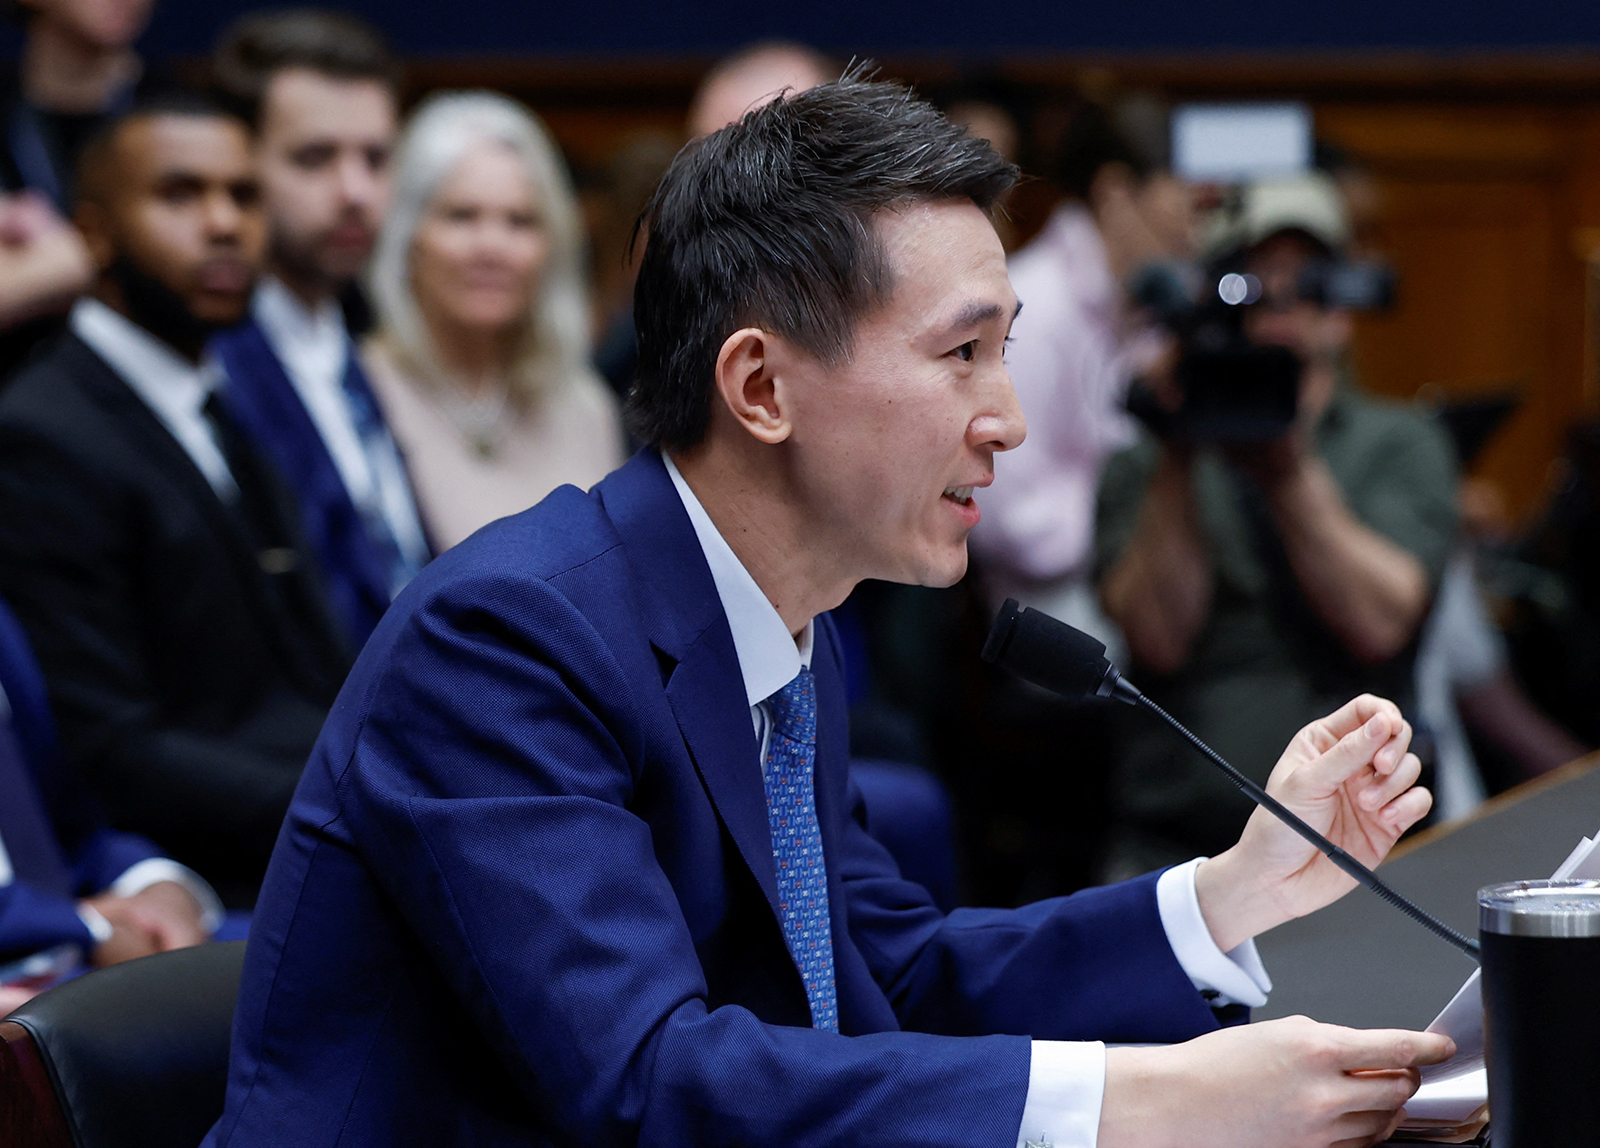 TikTok Chief Executive Shou Zi Chew testifying before a House Energy and Commerce Committee hearing on Capitol Hill today.